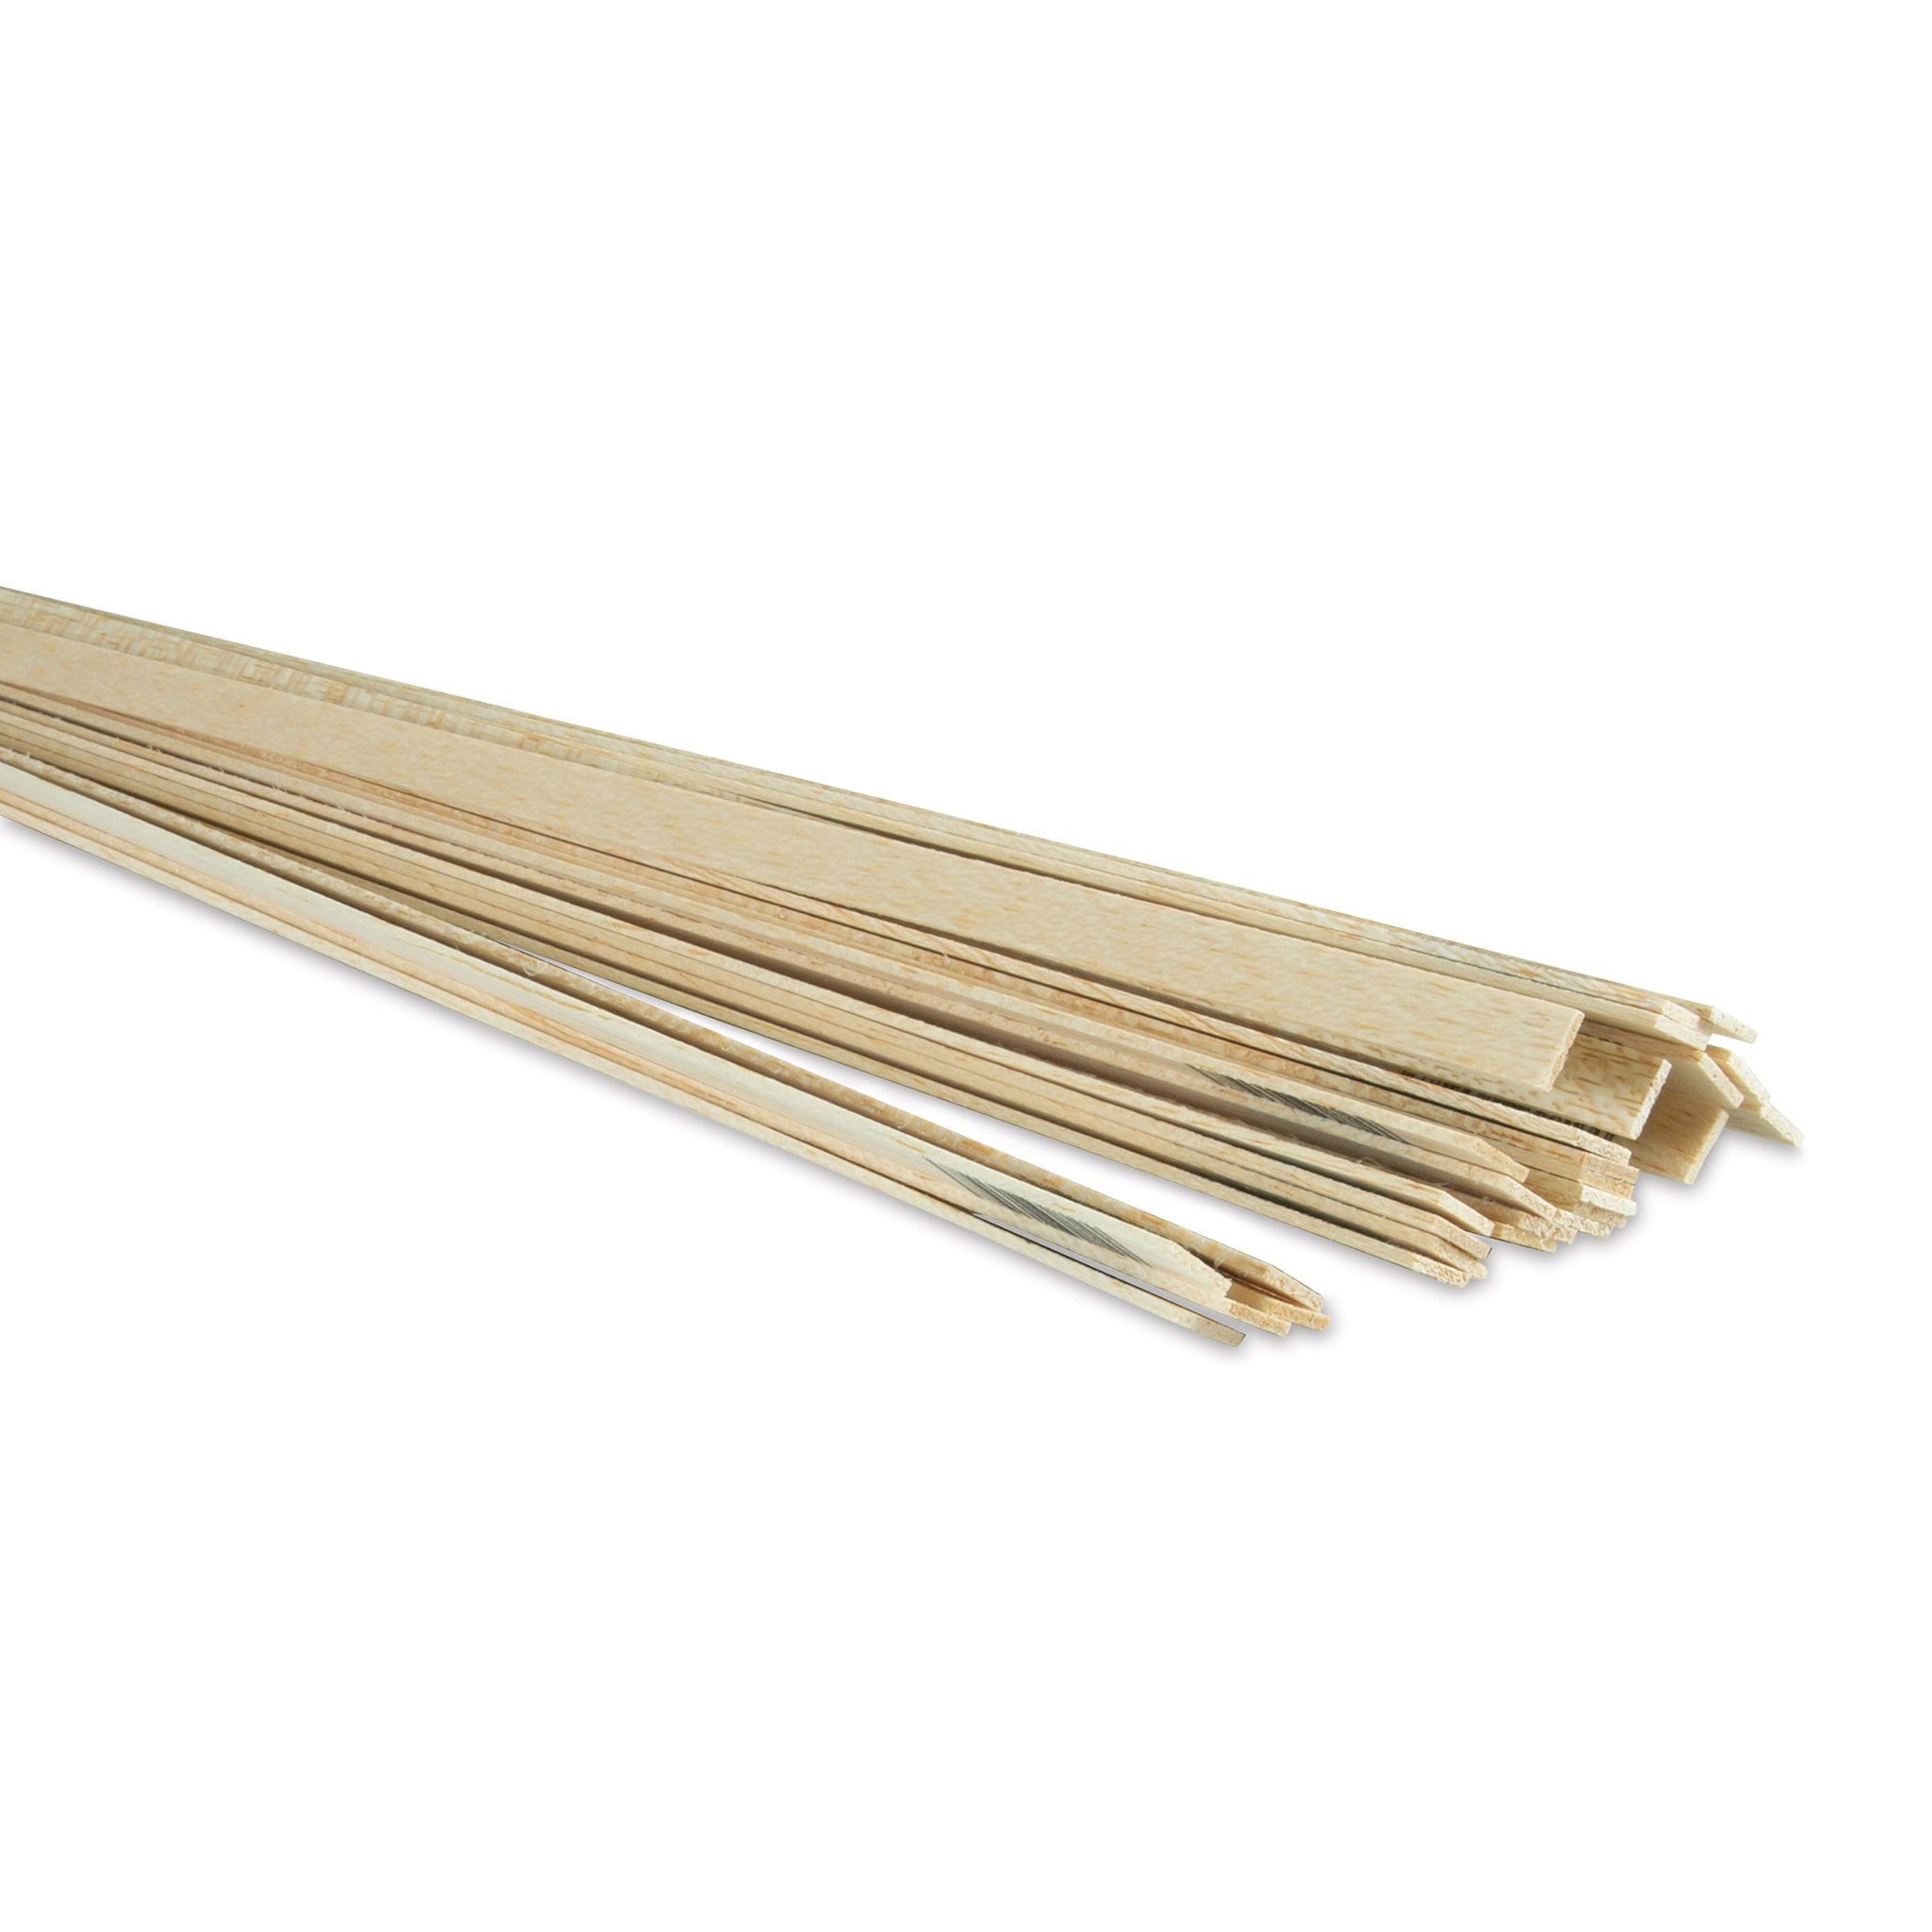 Midwest Products Balsa Wood Strips - 30 Pieces, 1/16' x 1/4' x 36'